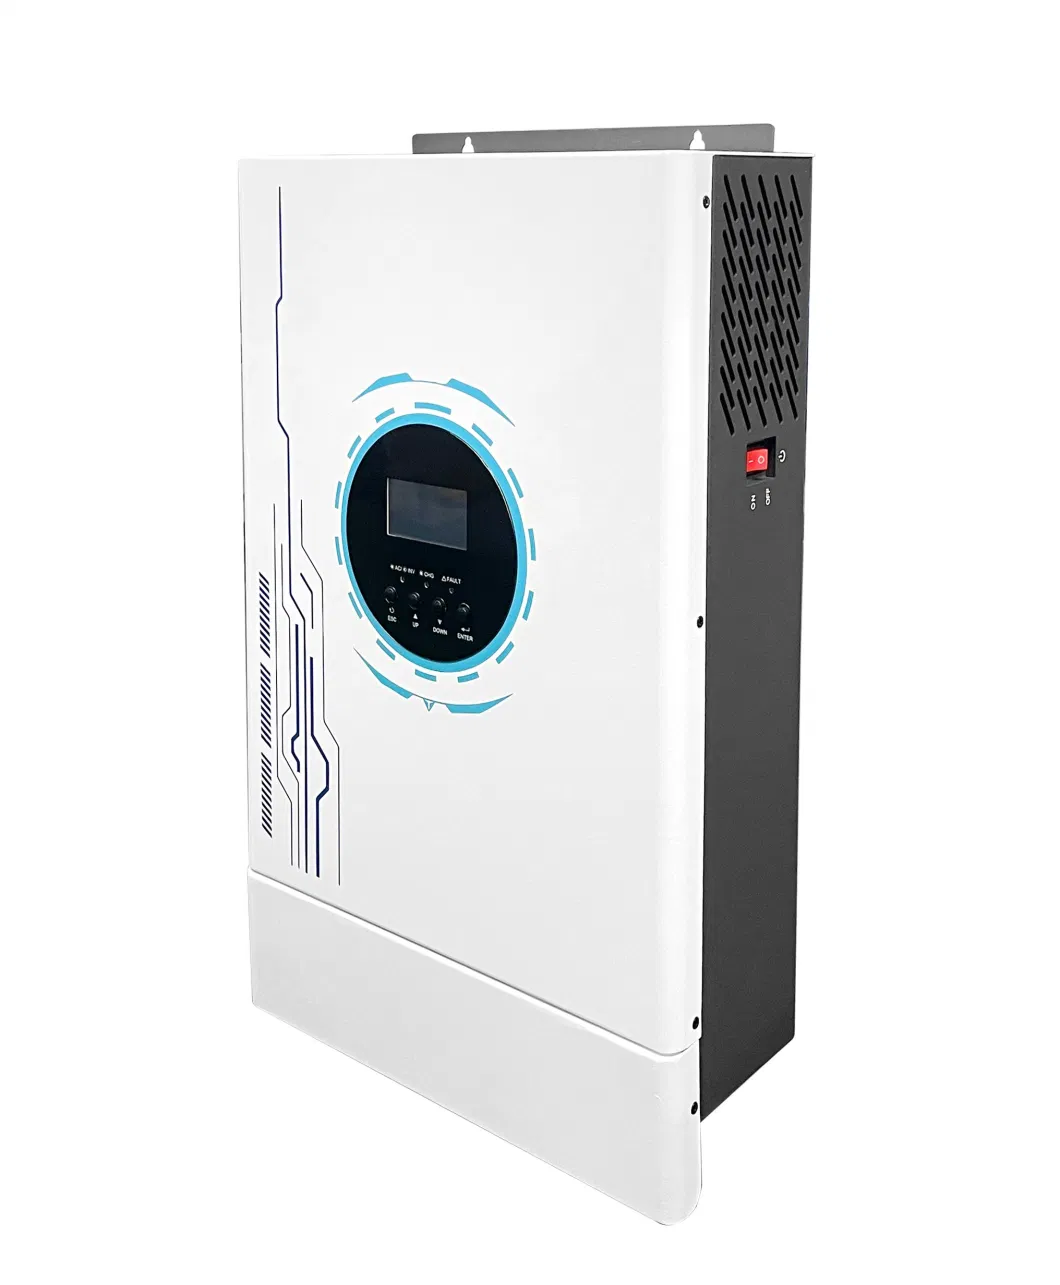 3 Kw 5kw Olu5048maxii on off Grid High Frequency Inverter Hybrid Solar with MPPT Controller Technology IP20 Protection